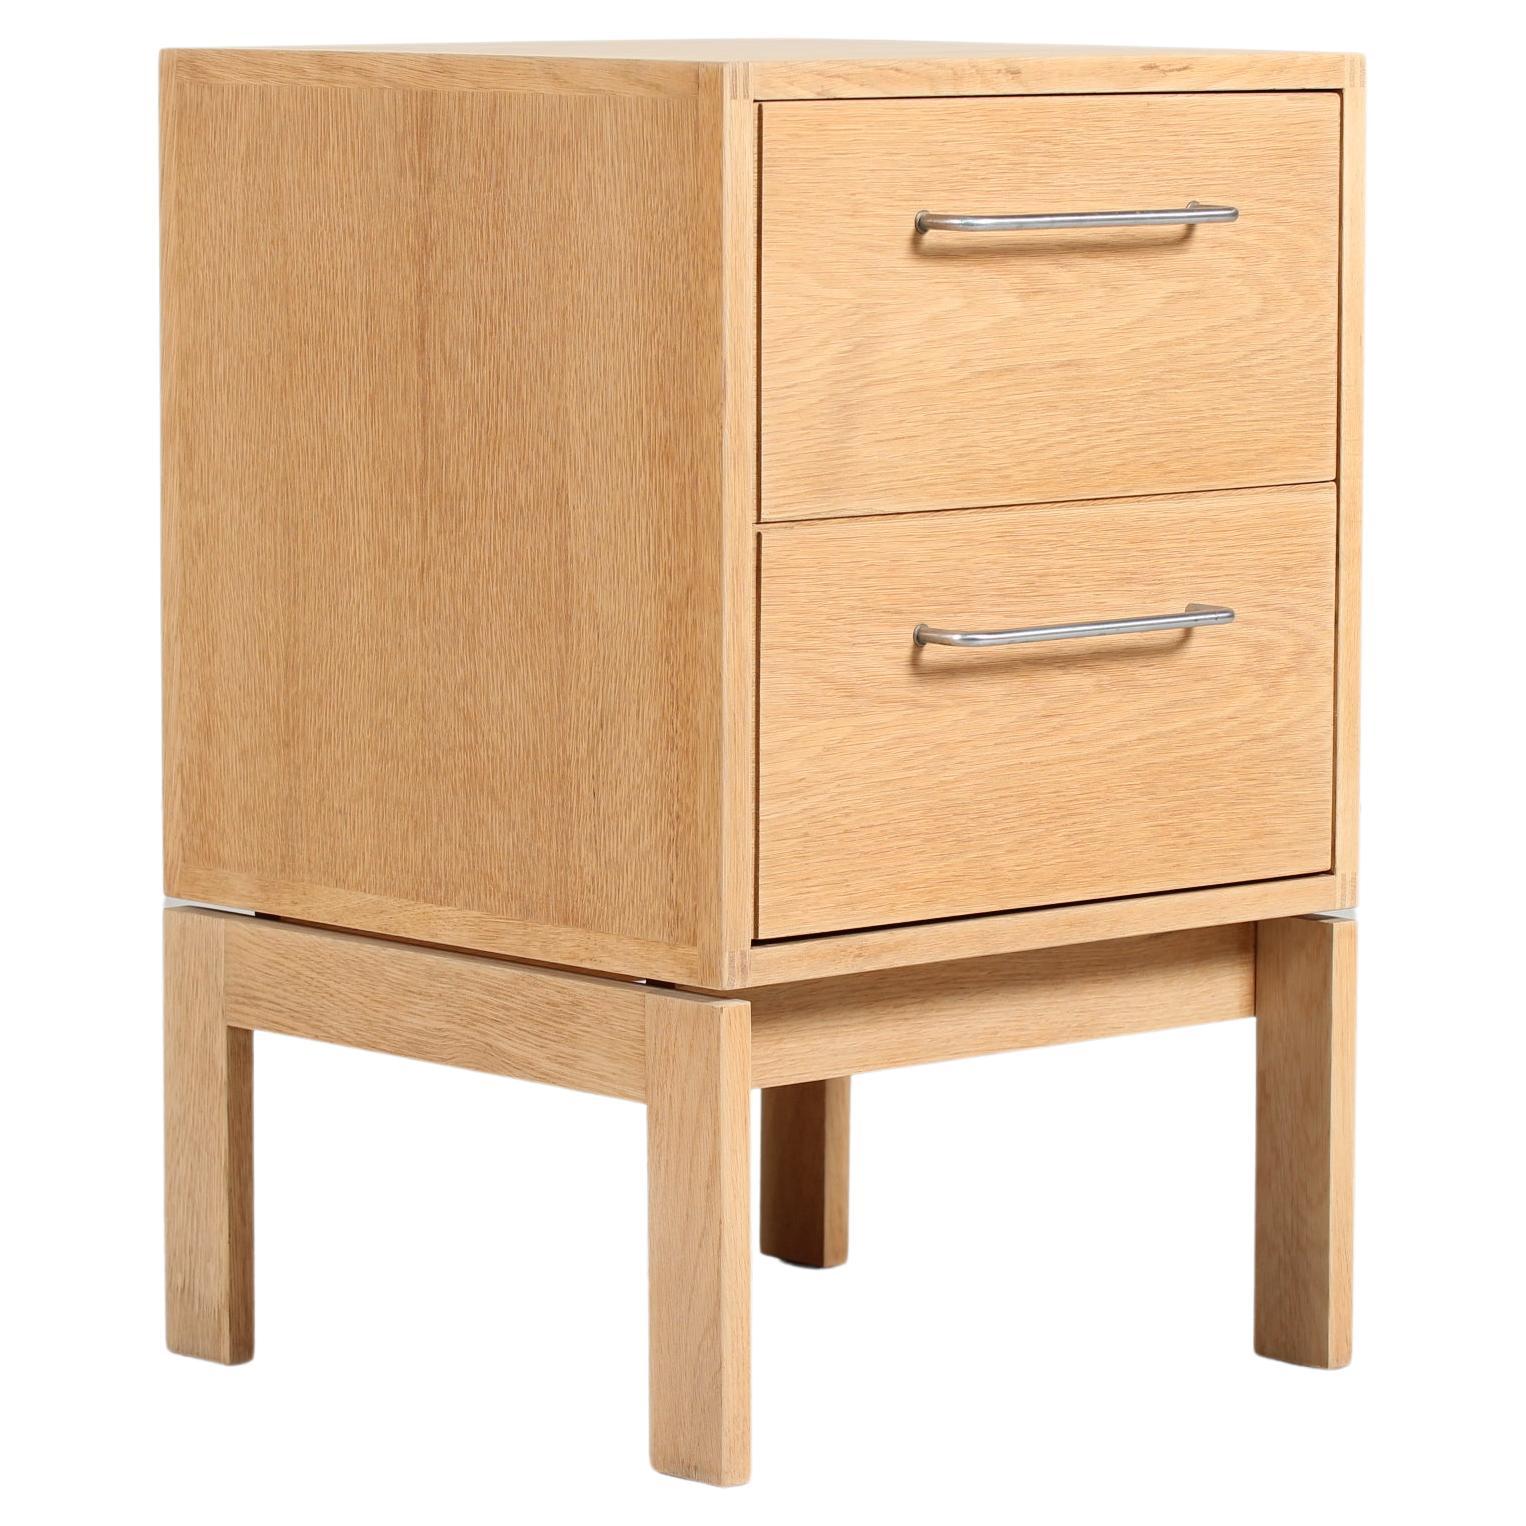 Danish Modern Small Oak Chest of Drawers, Bedside or Office, Munch Møbler, 1970s For Sale